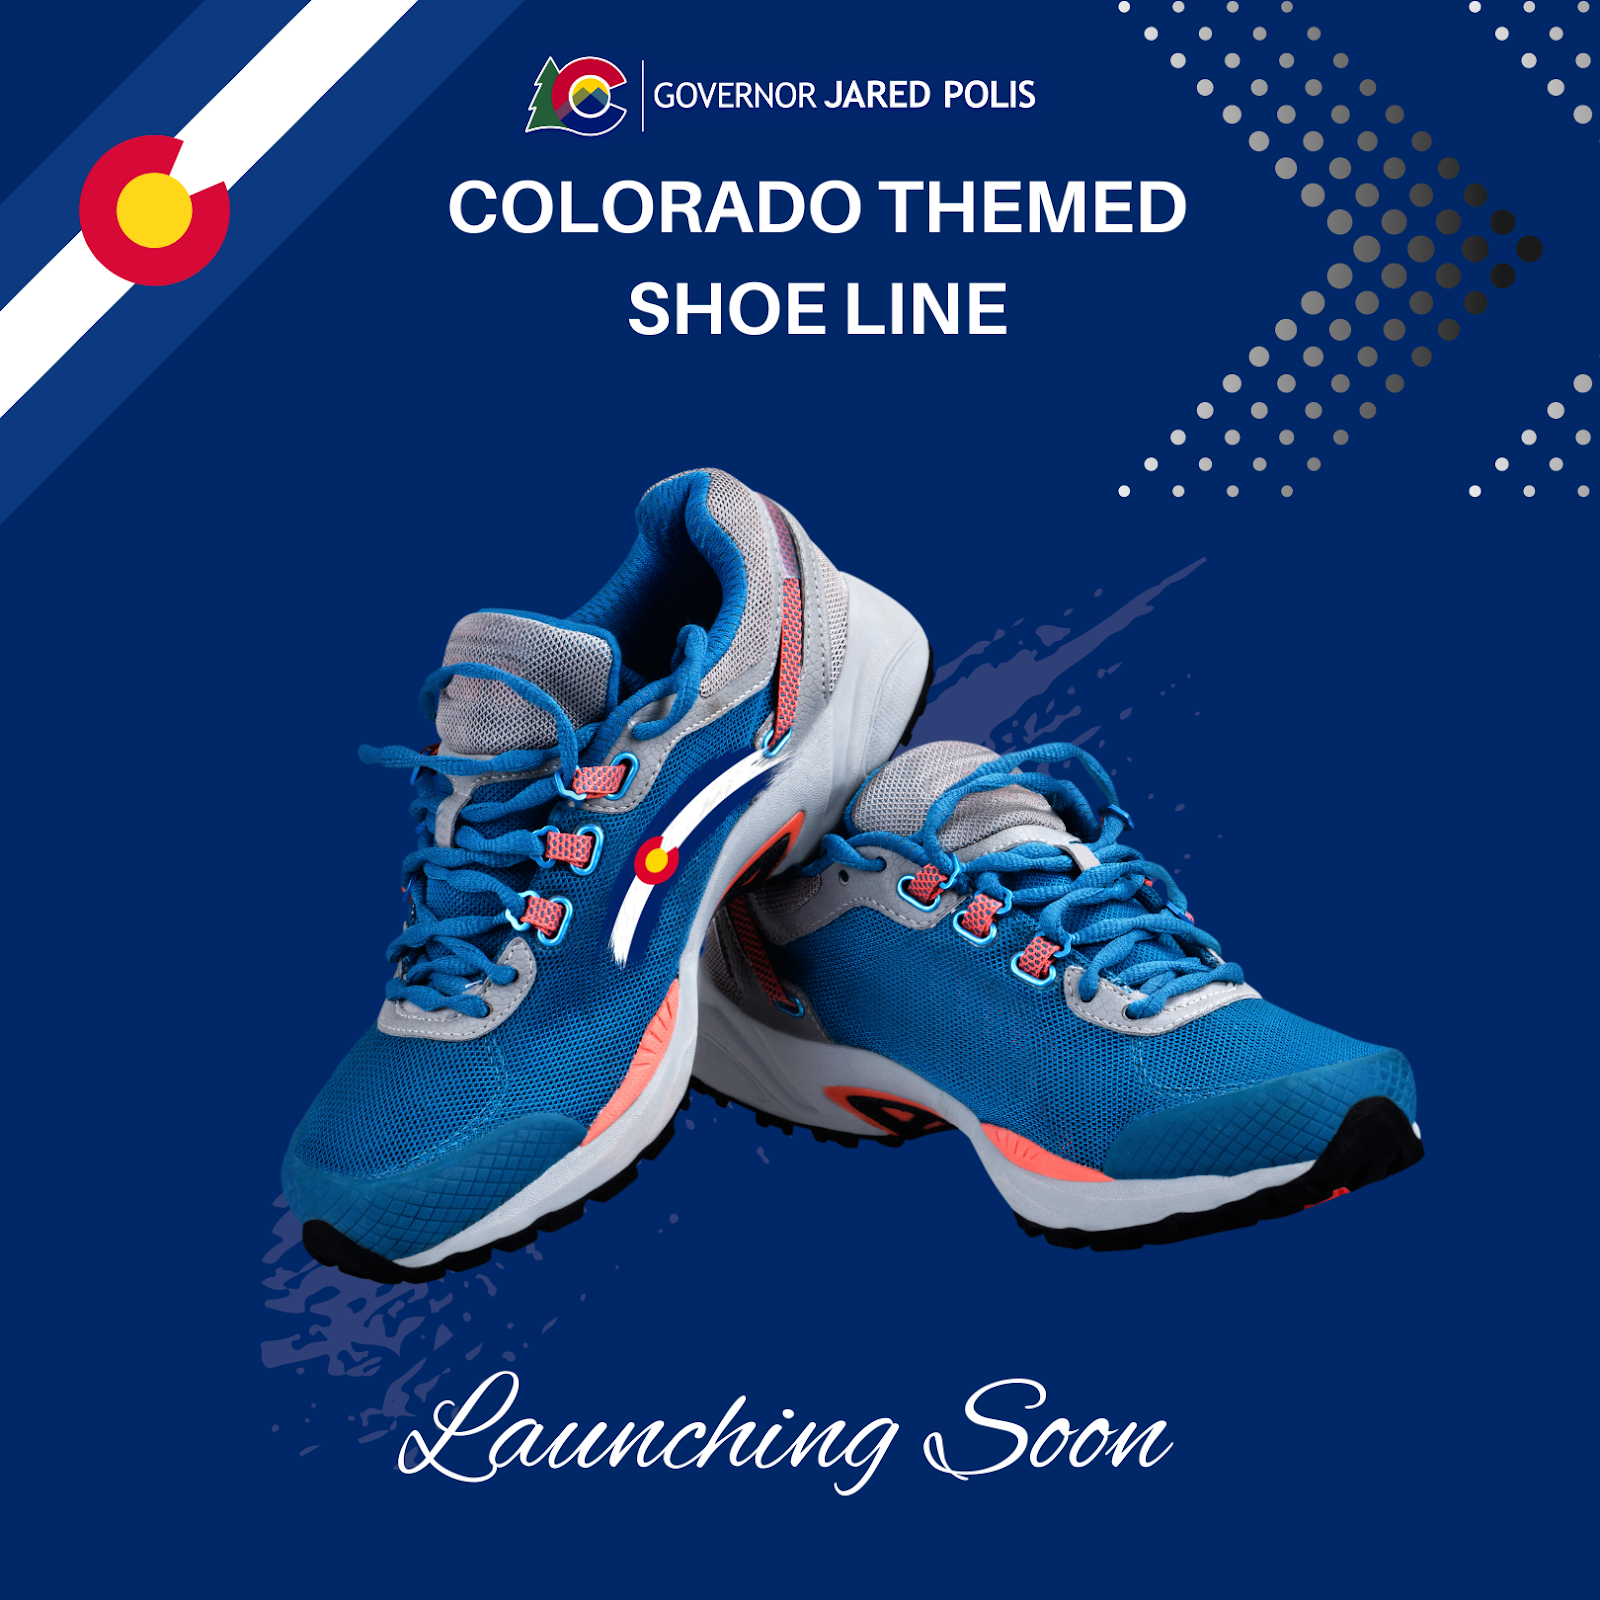 Colorado-themed shoe line. Blue outdoor shoes with orange and white color accents with Colorado logo